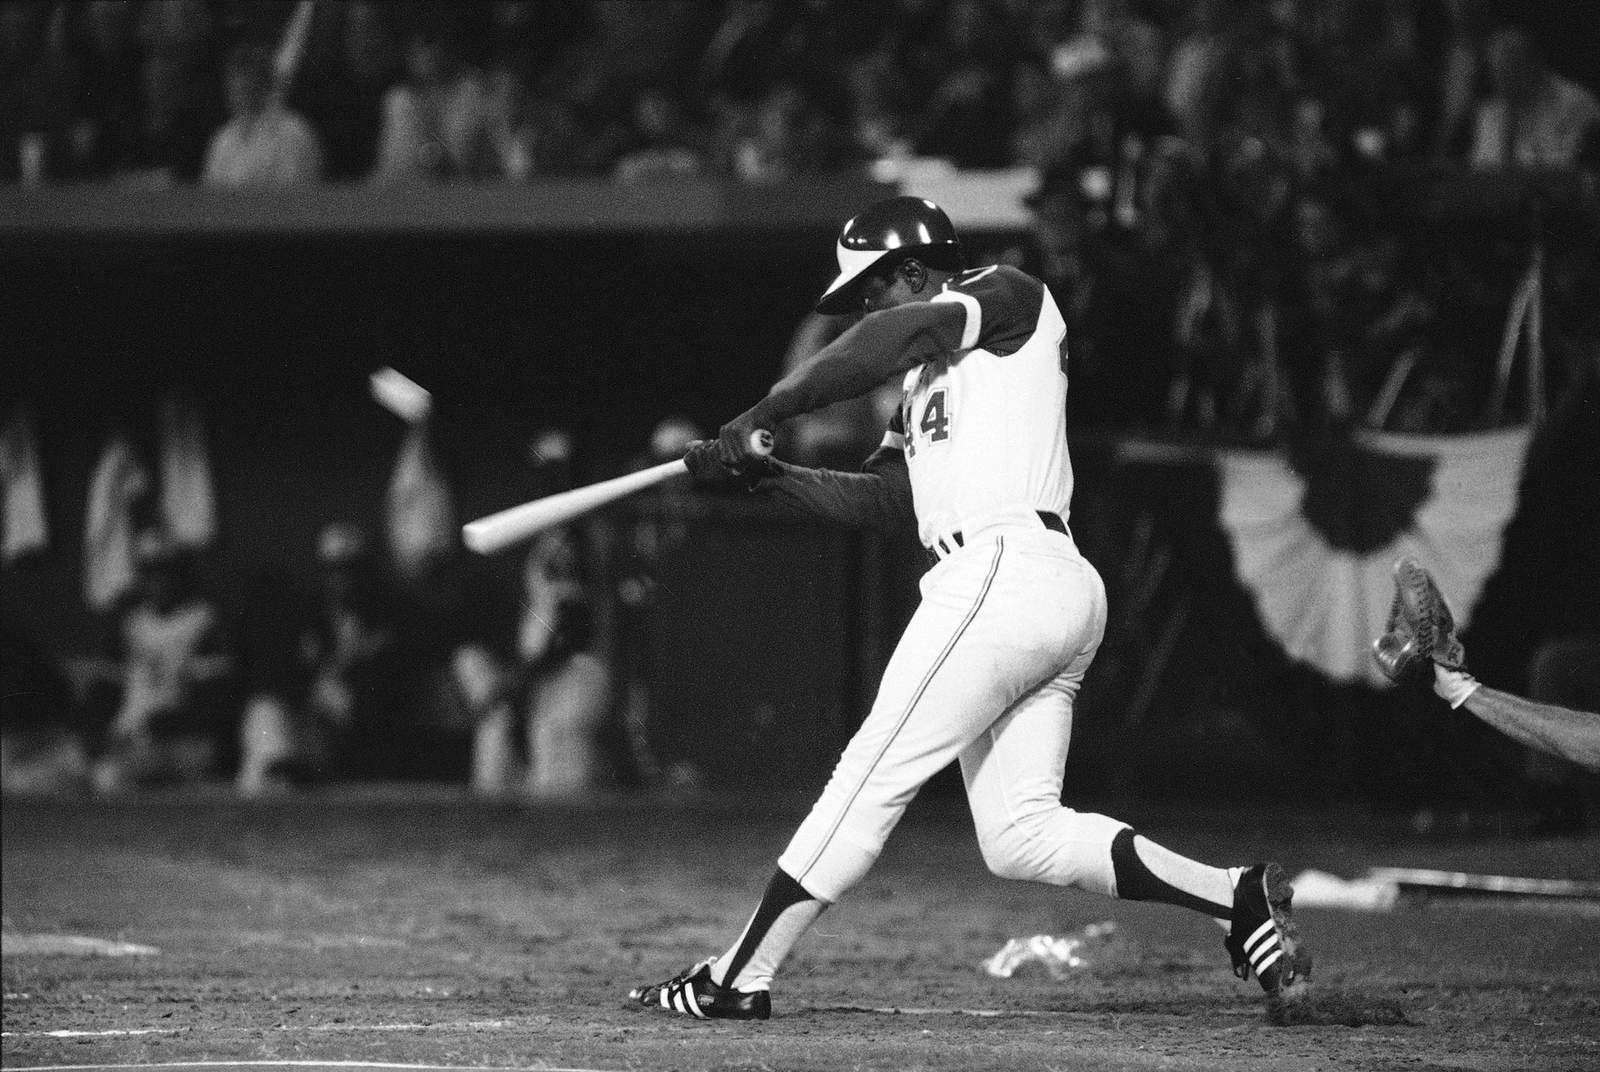 A look at Hank Aaron’s career and accomplishments